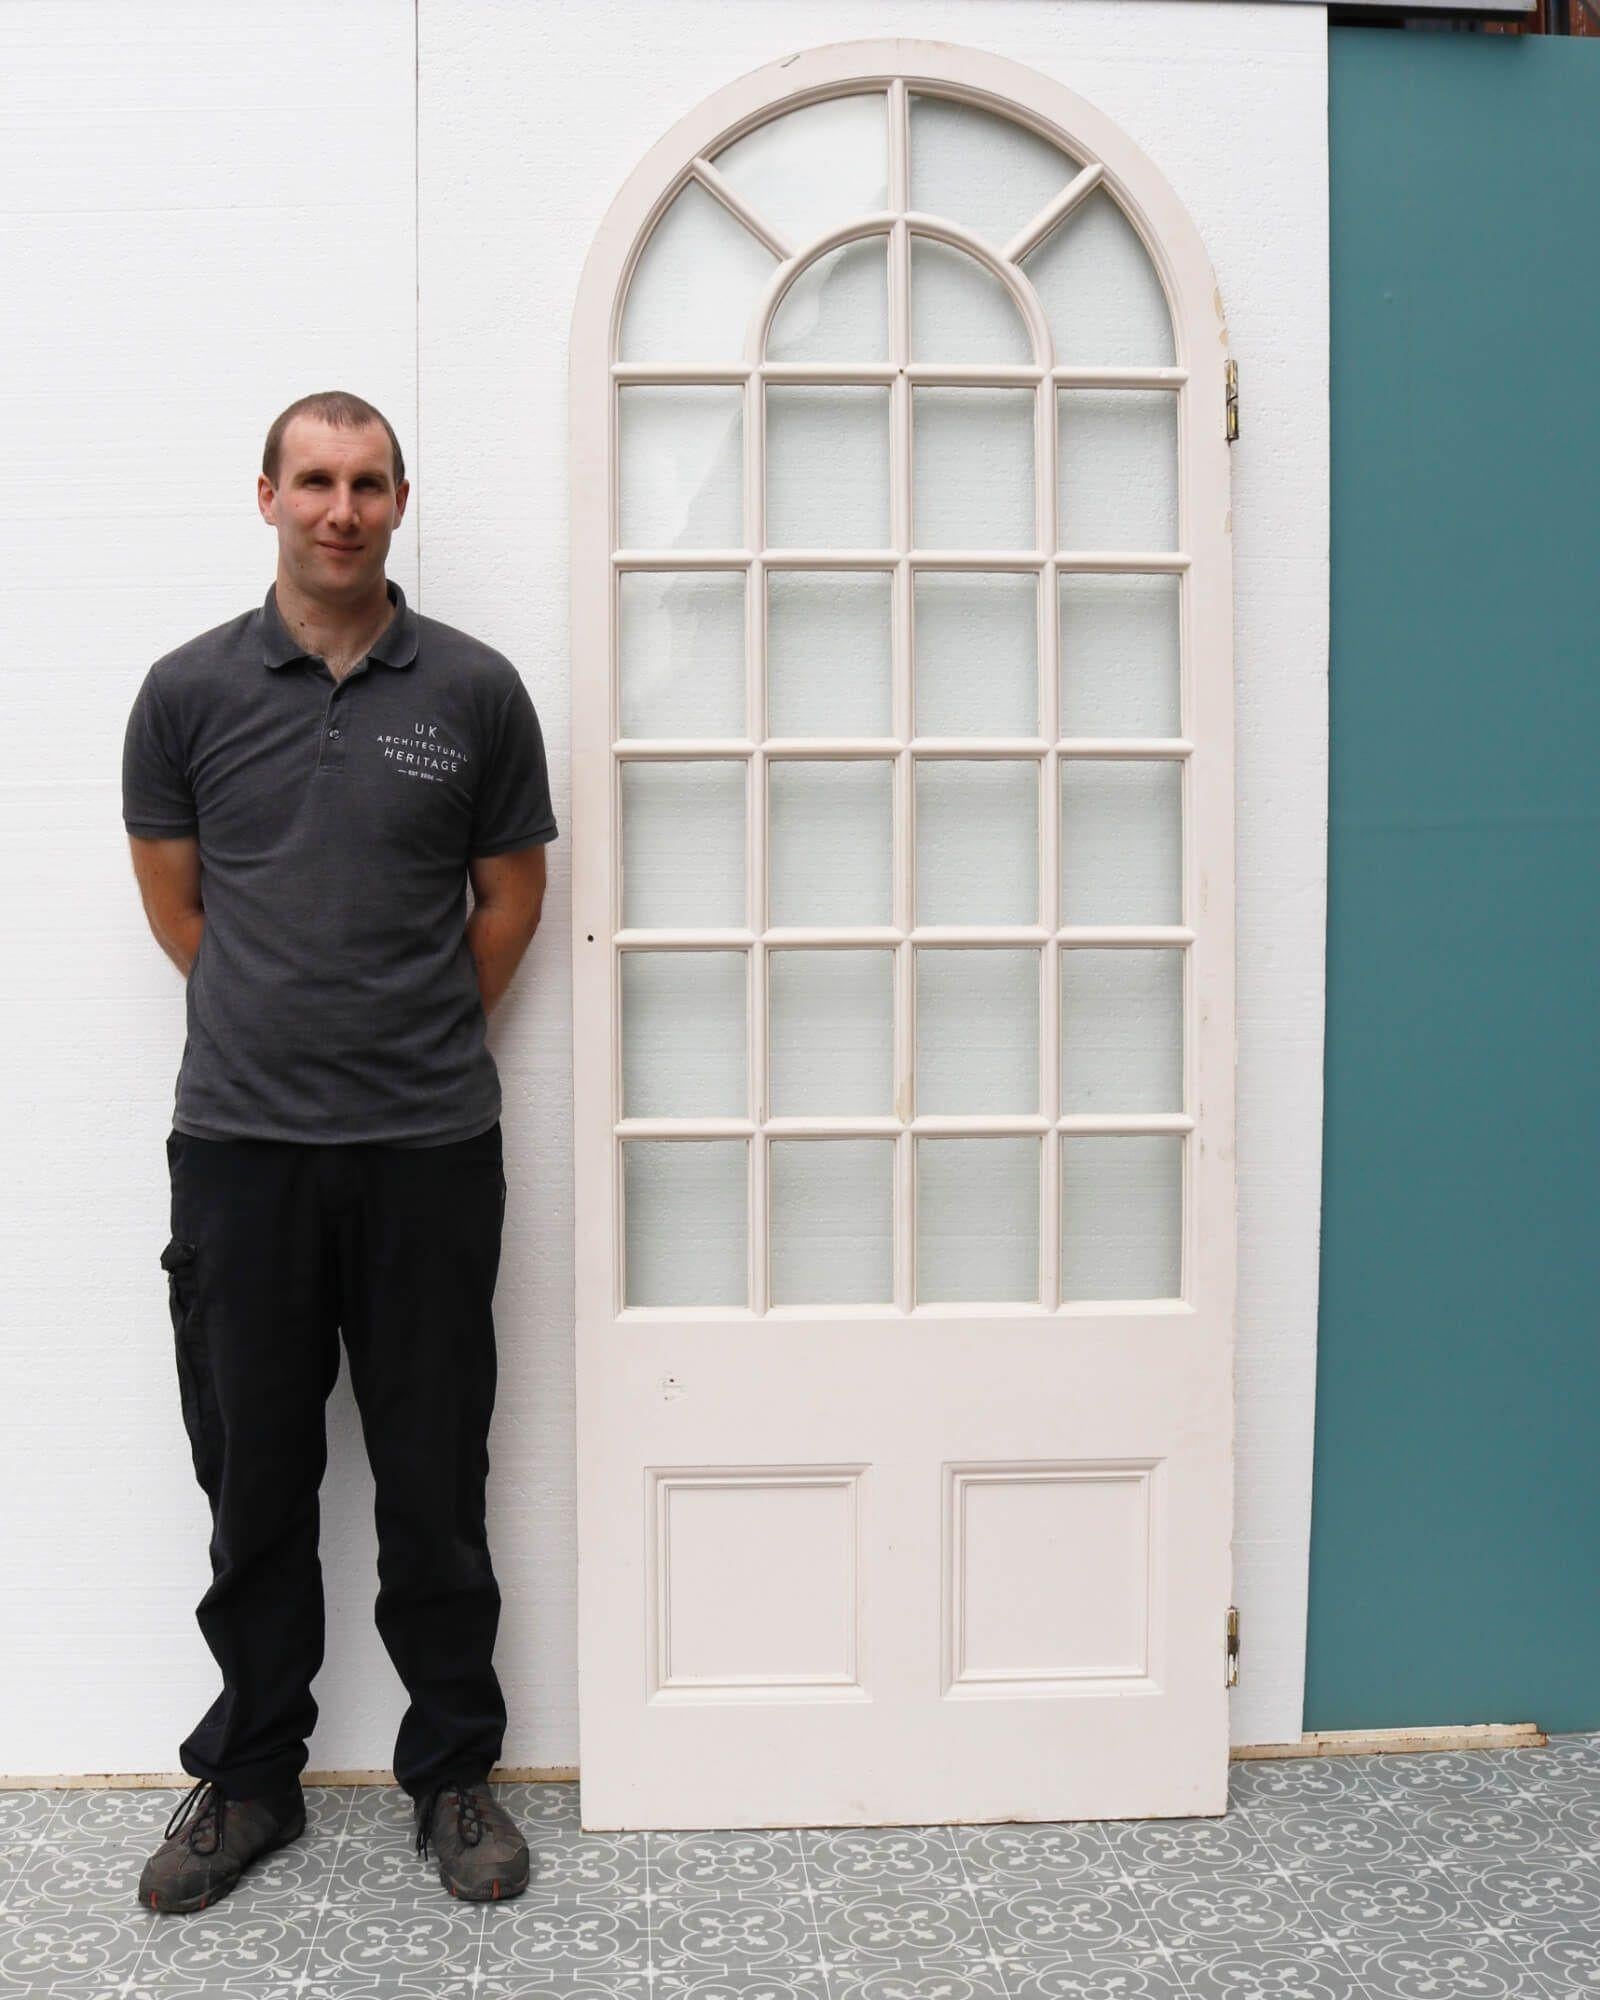 An antique Victorian arched glazed white door suitable for interior use. Dating to circa 1870, this elegant door was sourced from a Victorian orangery in Tetbury, England.

With a graceful and stylish look, this antique door would look stunning in a